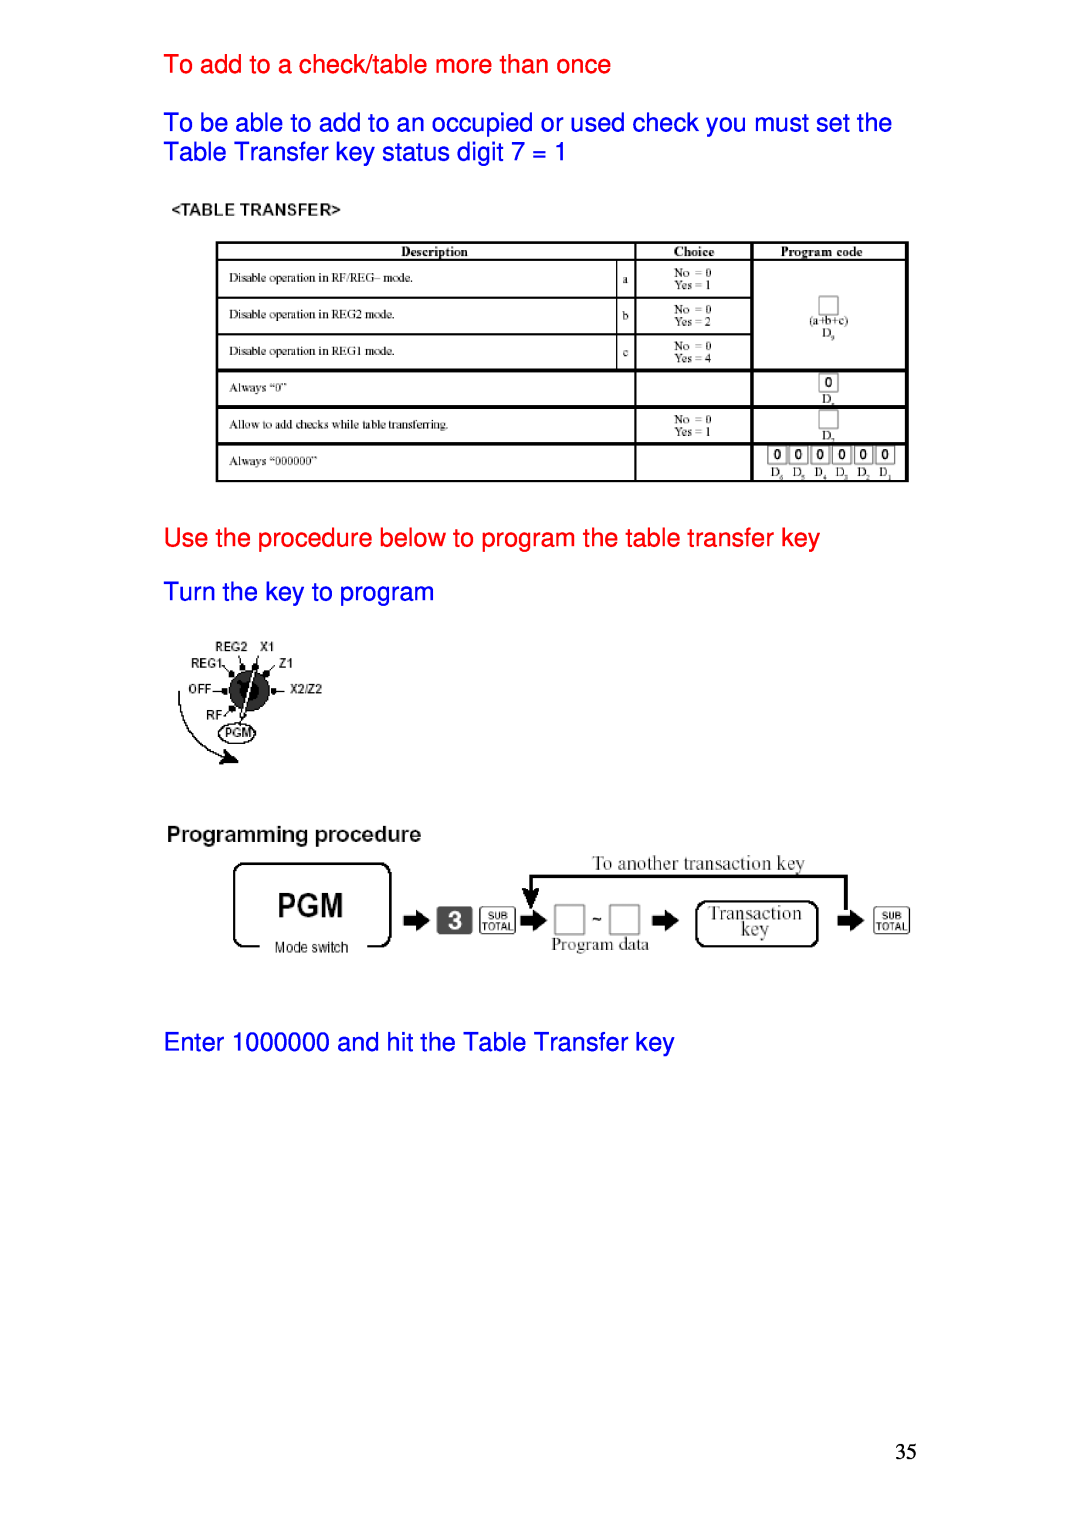 Delta TE-4000 manual To add to a check/table more than once, Use the procedure below to program the table transfer key 